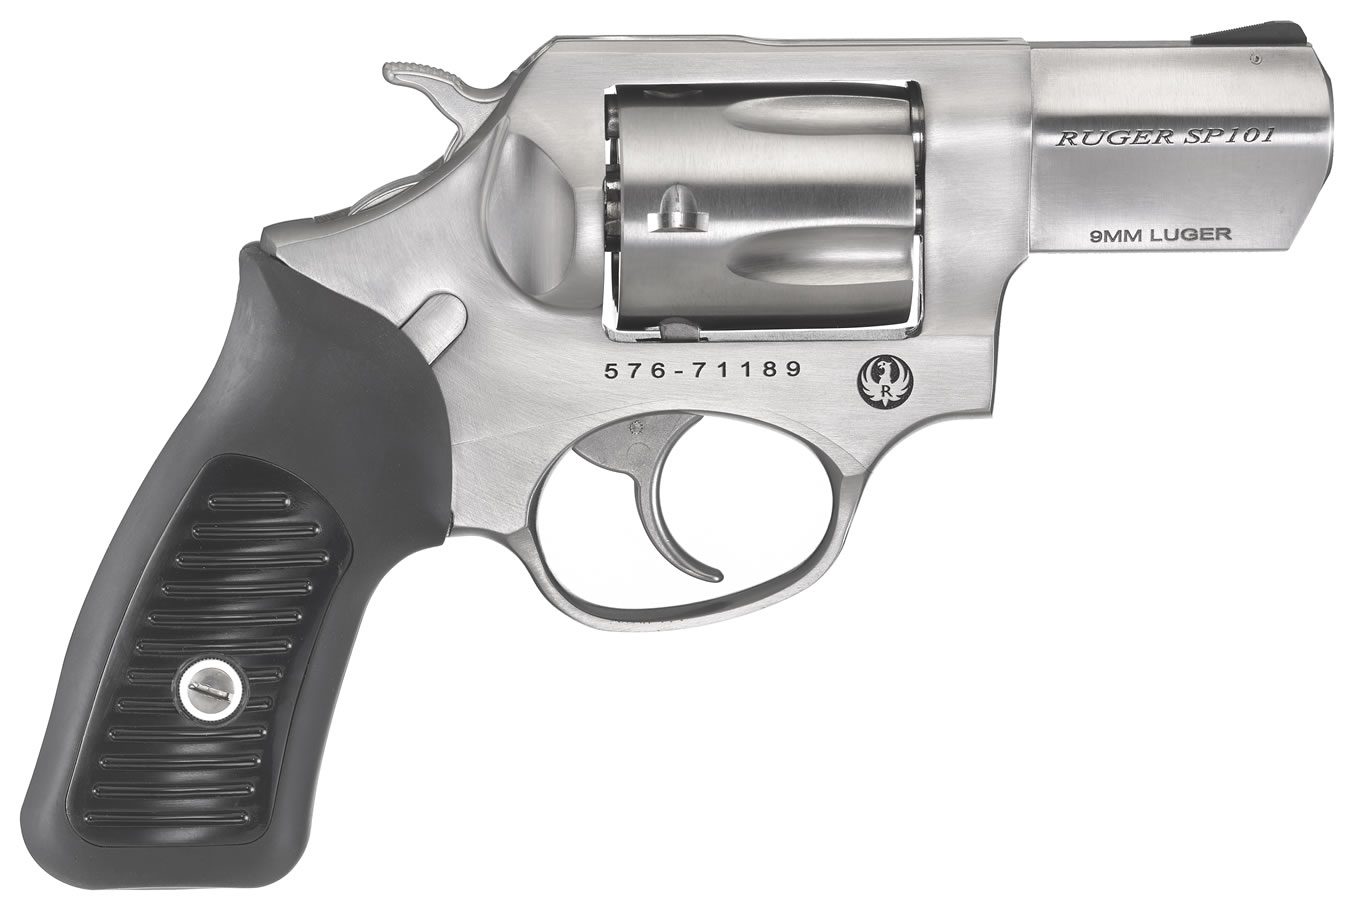 RUGER SP101 9MM DOUBLE-ACTION REVOLVER